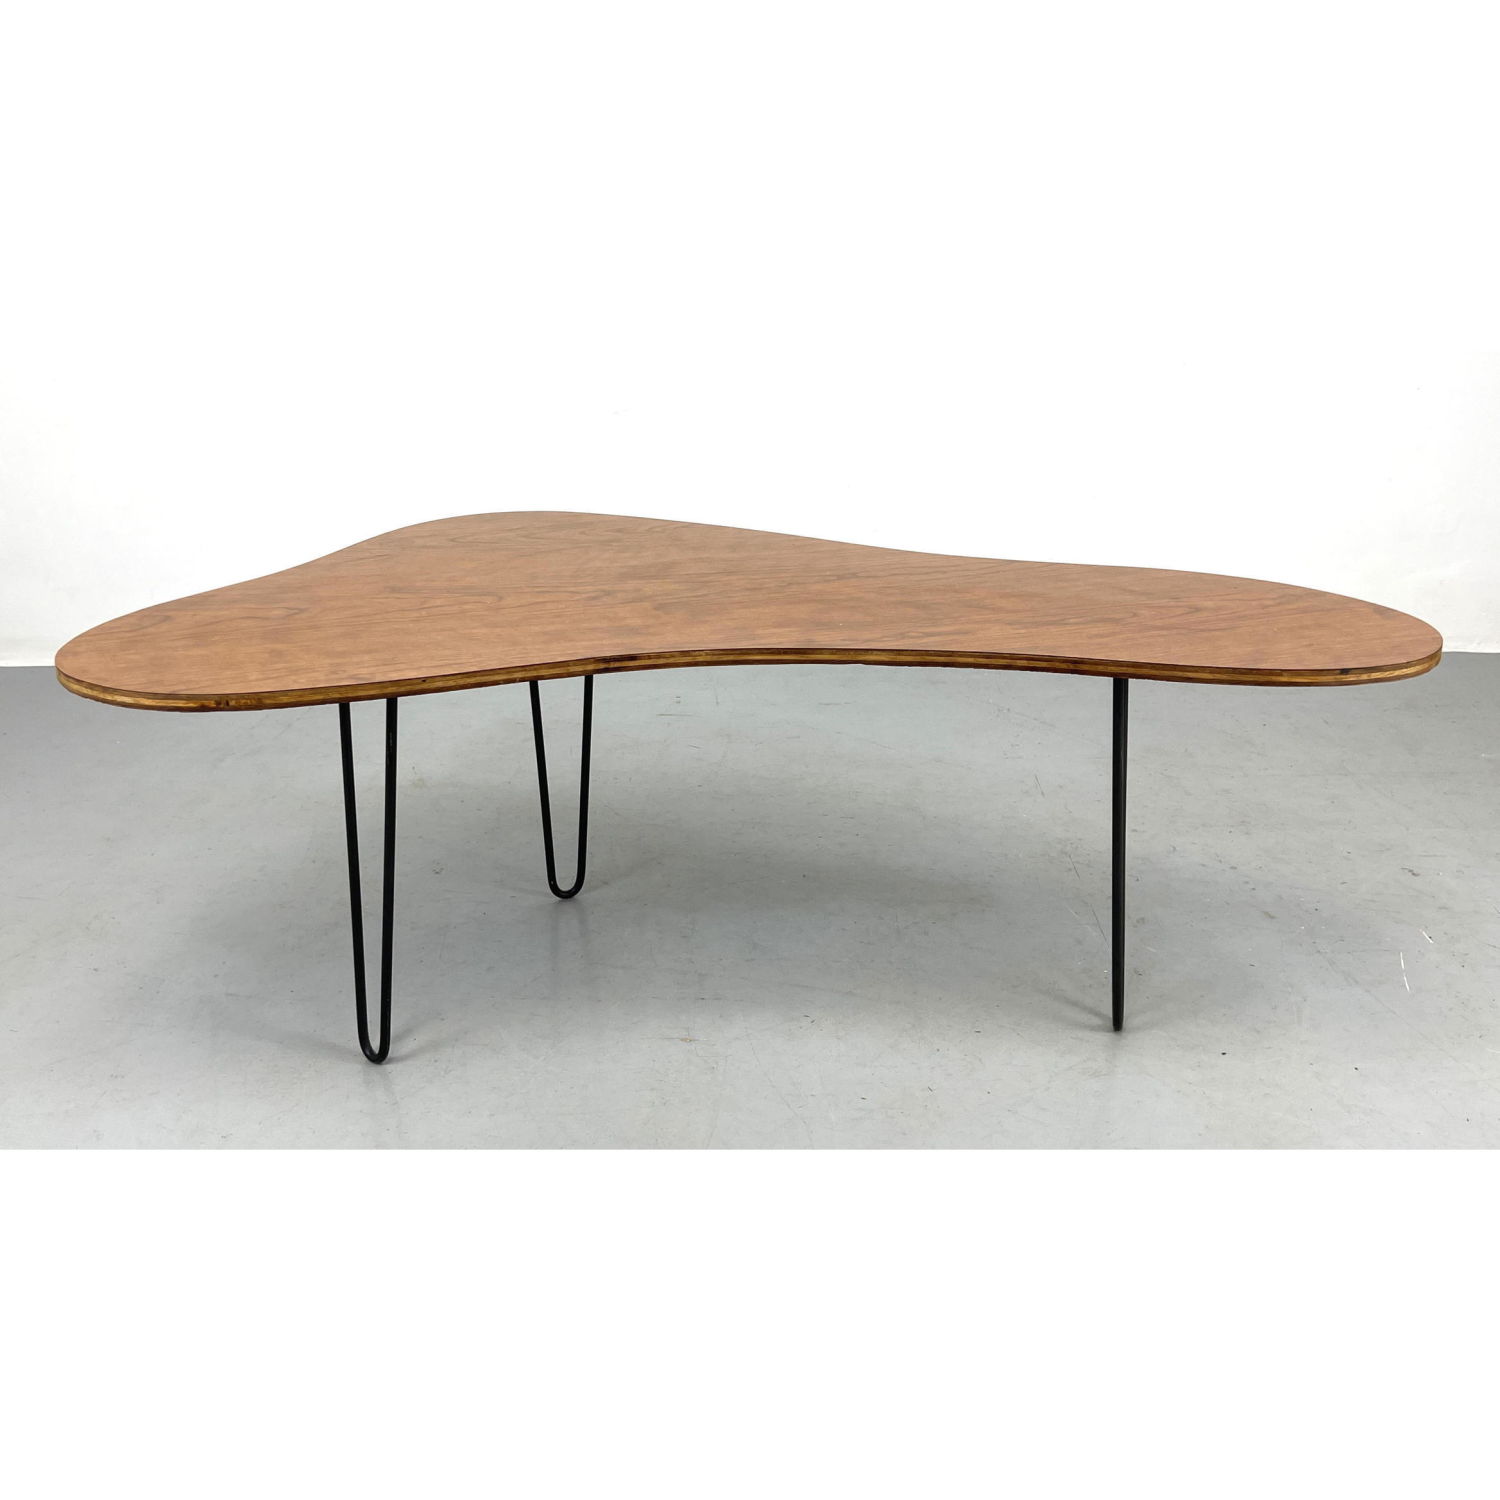 Kidney shaped cocktail table. Hairpin